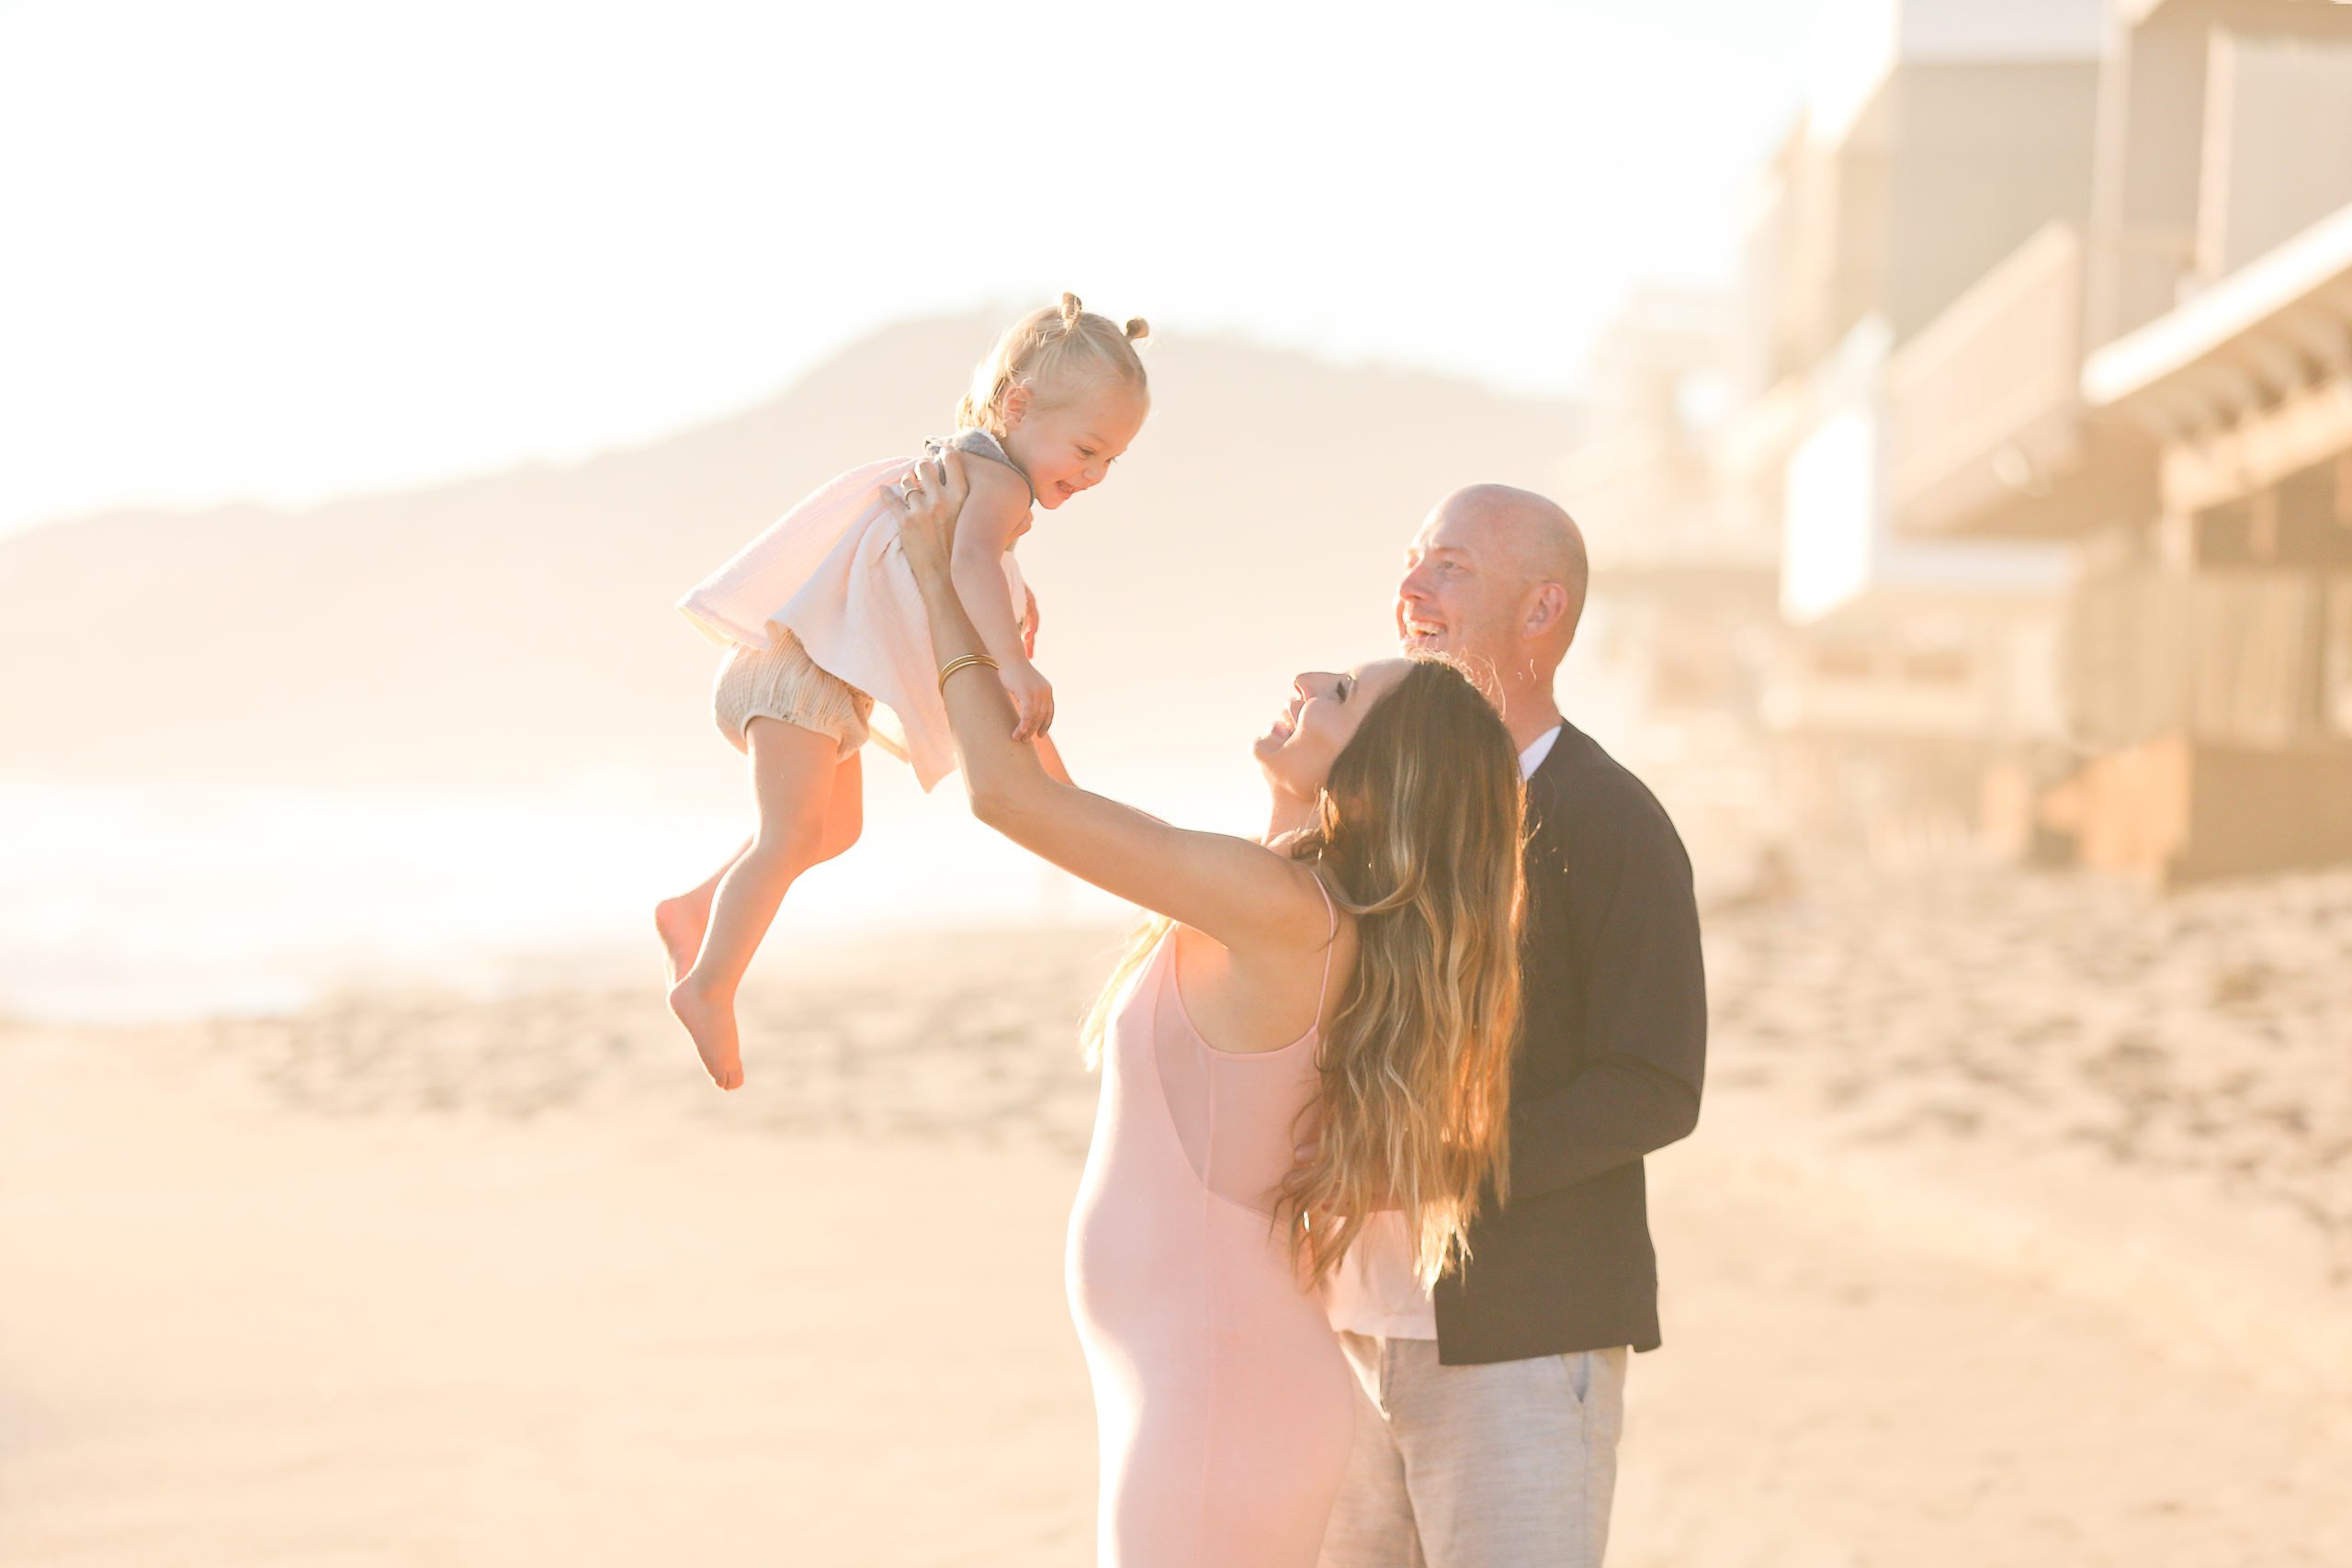 A pregnant woman in a pink dress lifts a female toddler in a pink dress while a man in a black coast and white pants smiles at them. They are on a sunny beach with buildings, mountains and the ocean in the background.